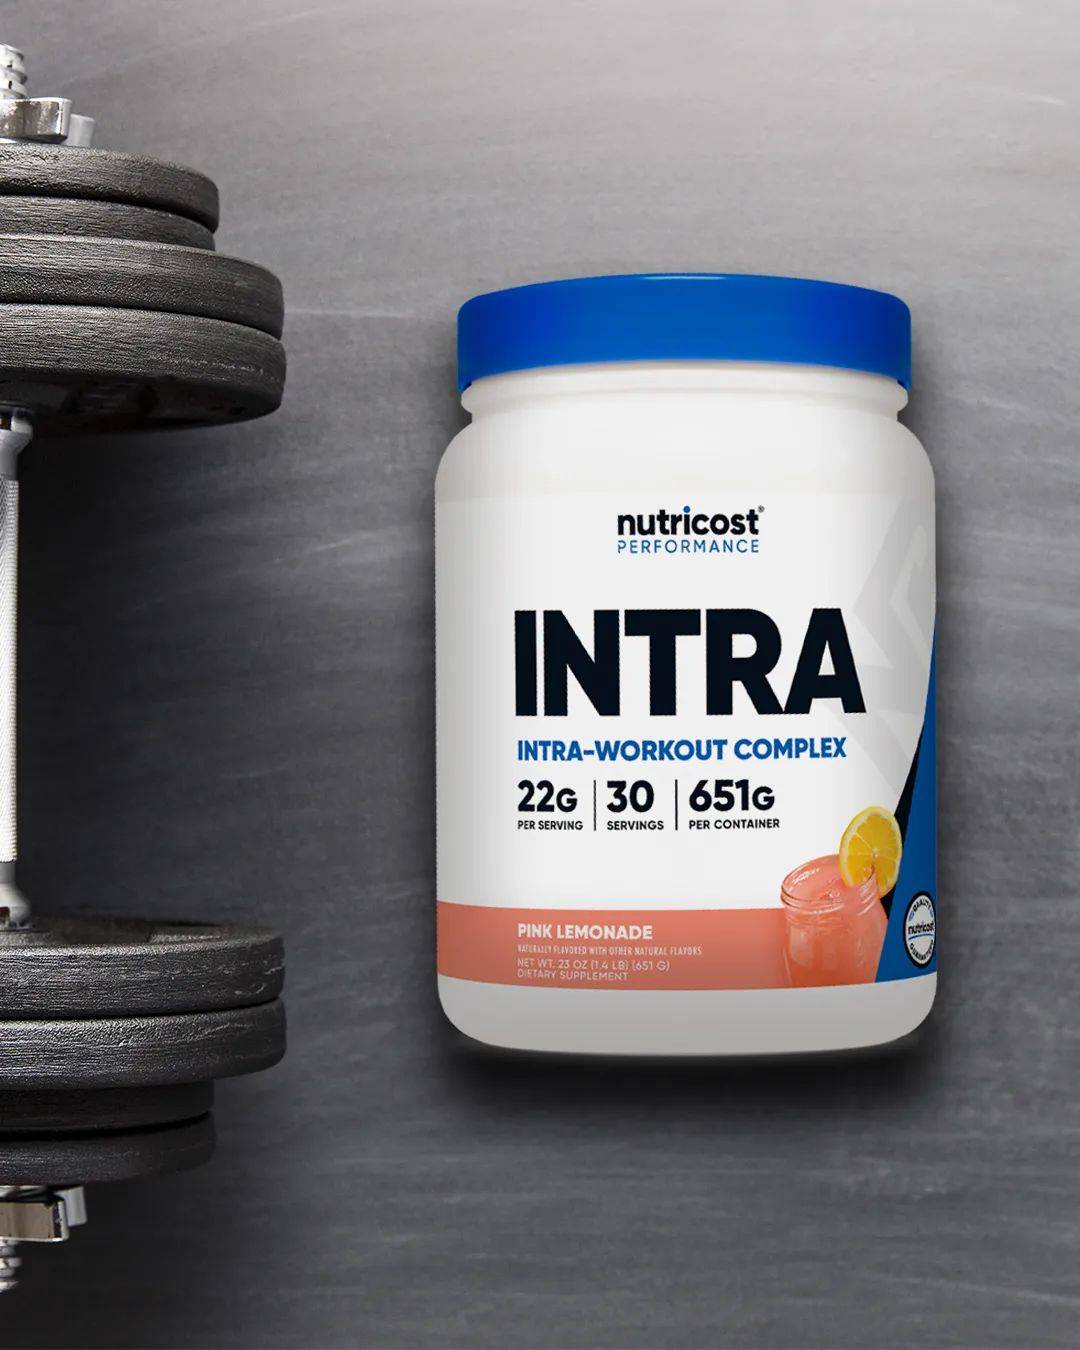 Nutricost Intra-Workout instagram